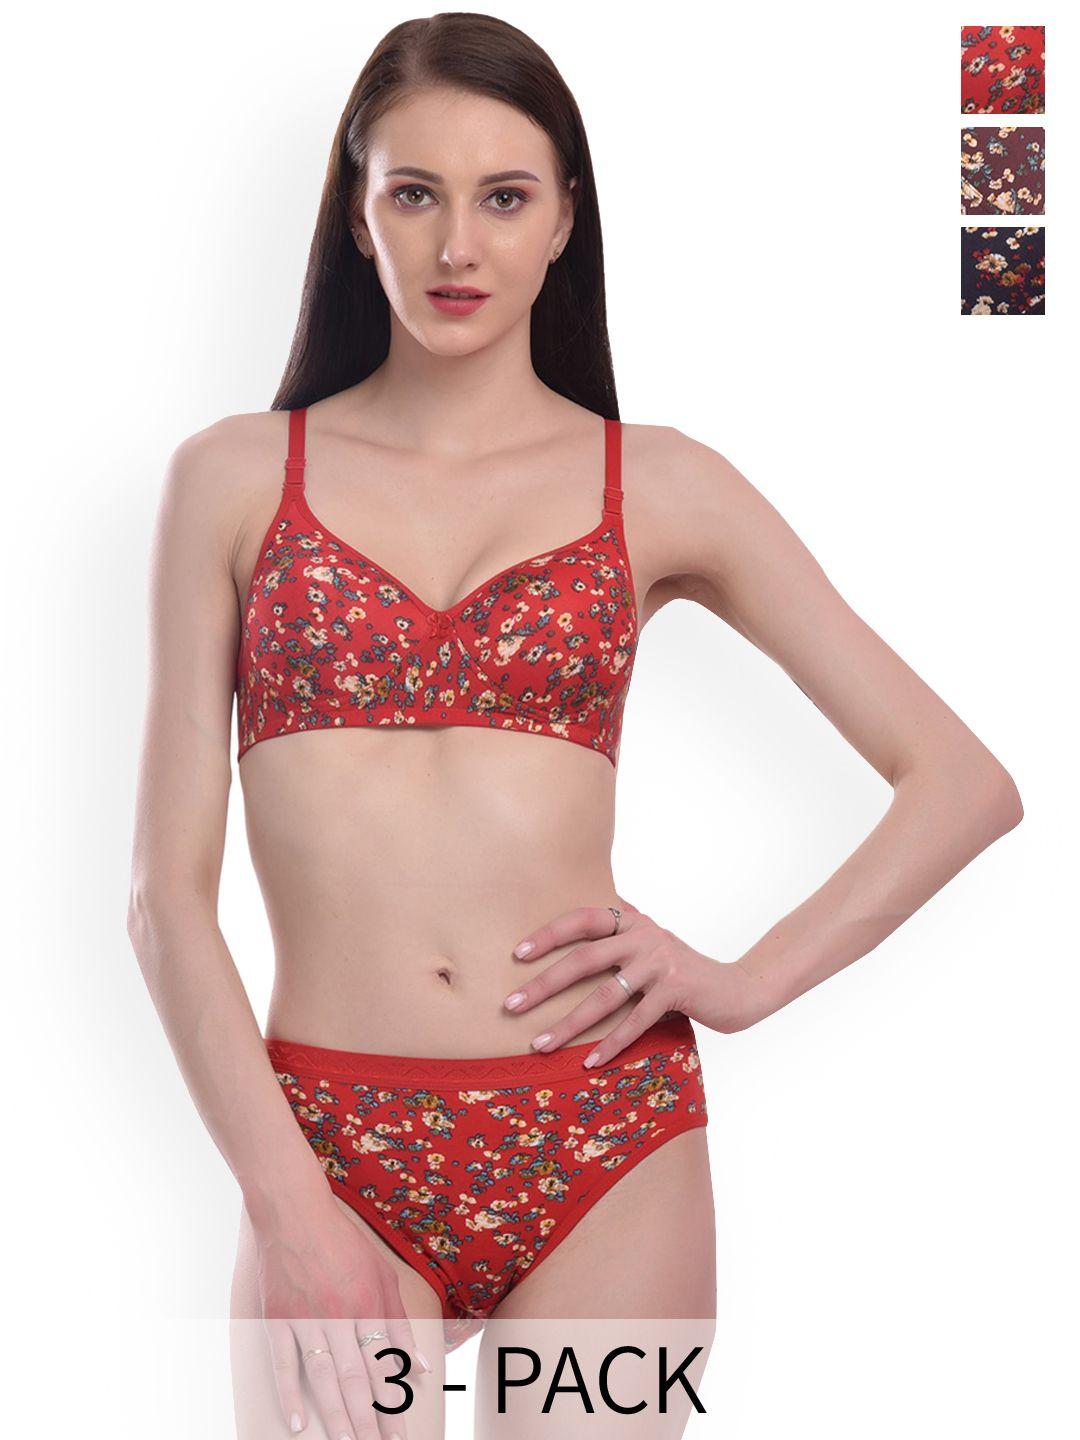 extoes pack of 3 printed cotton lingerie sets